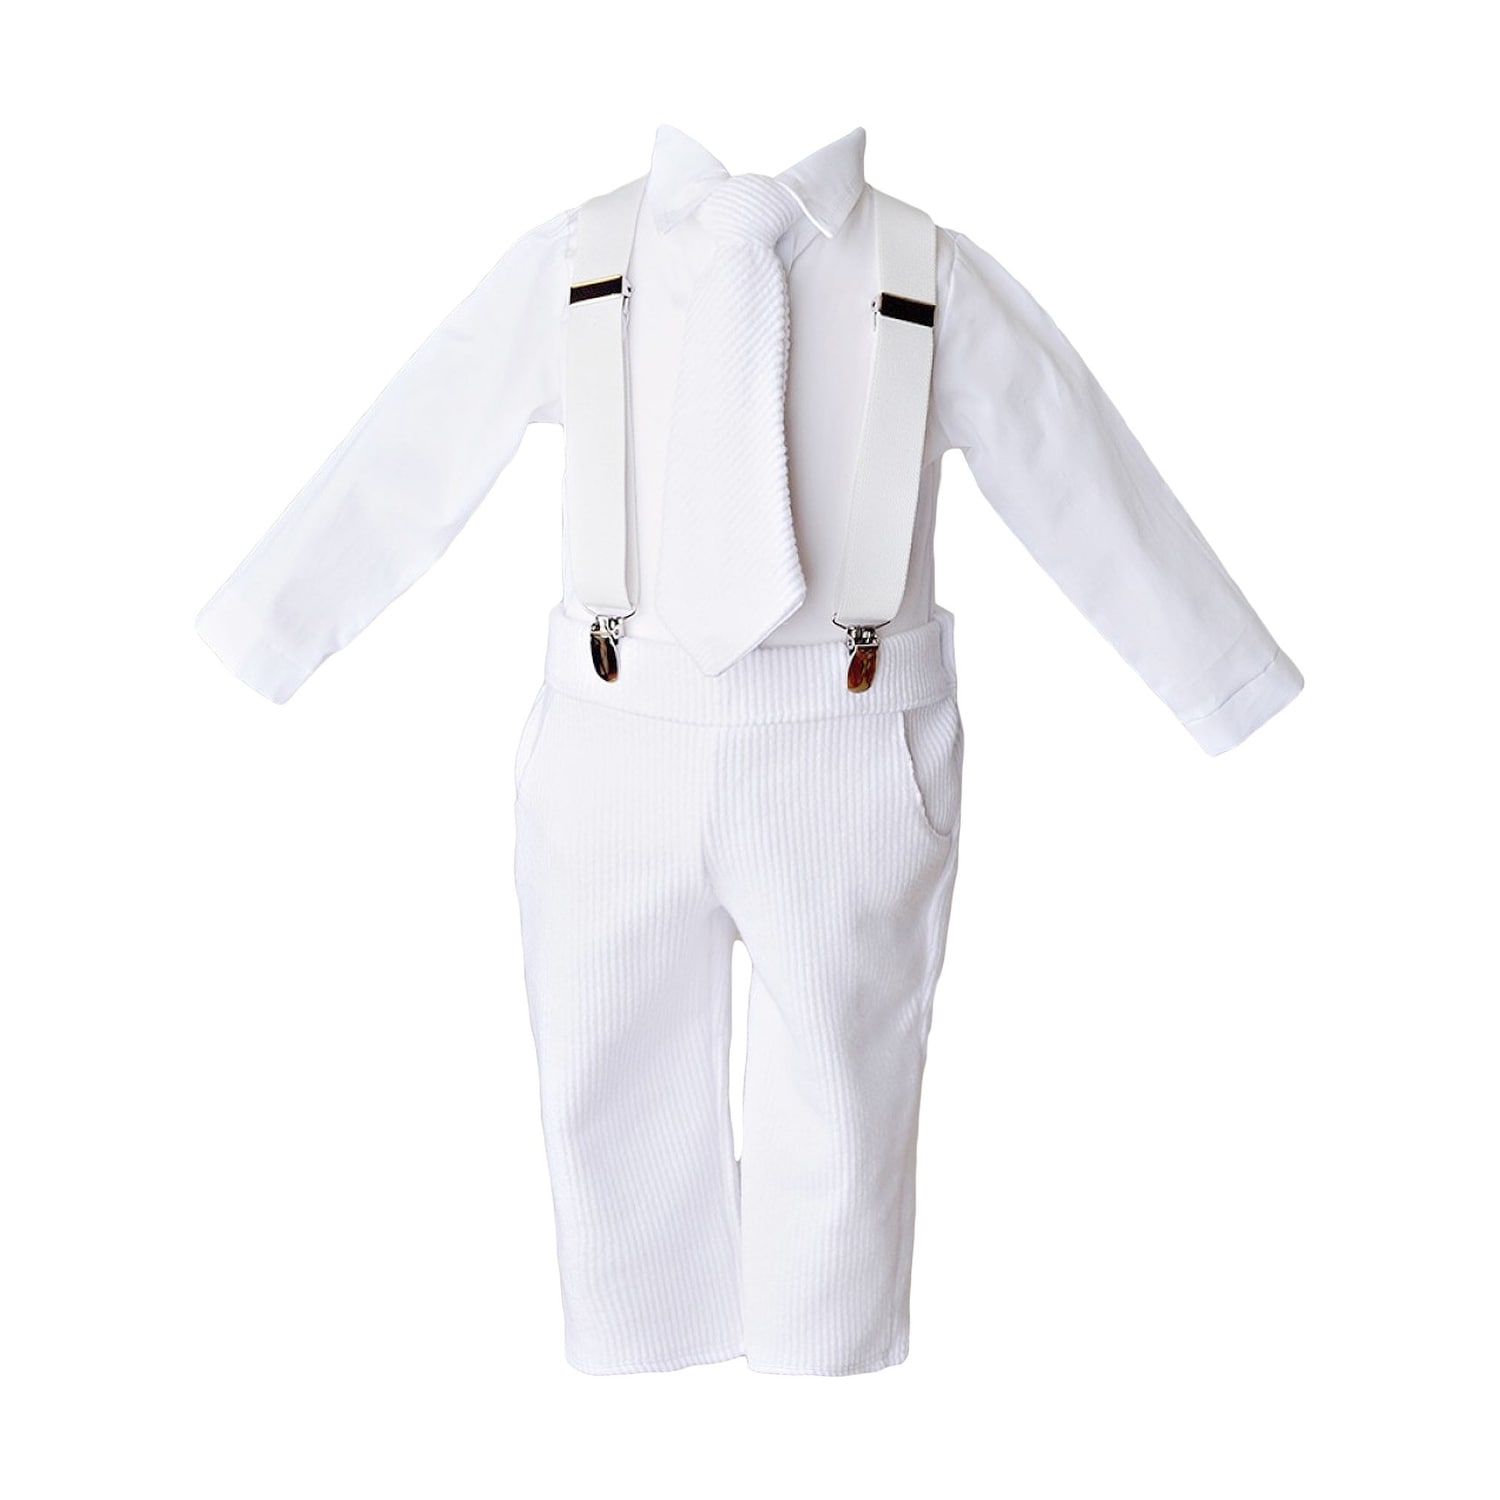 romper christening outfit